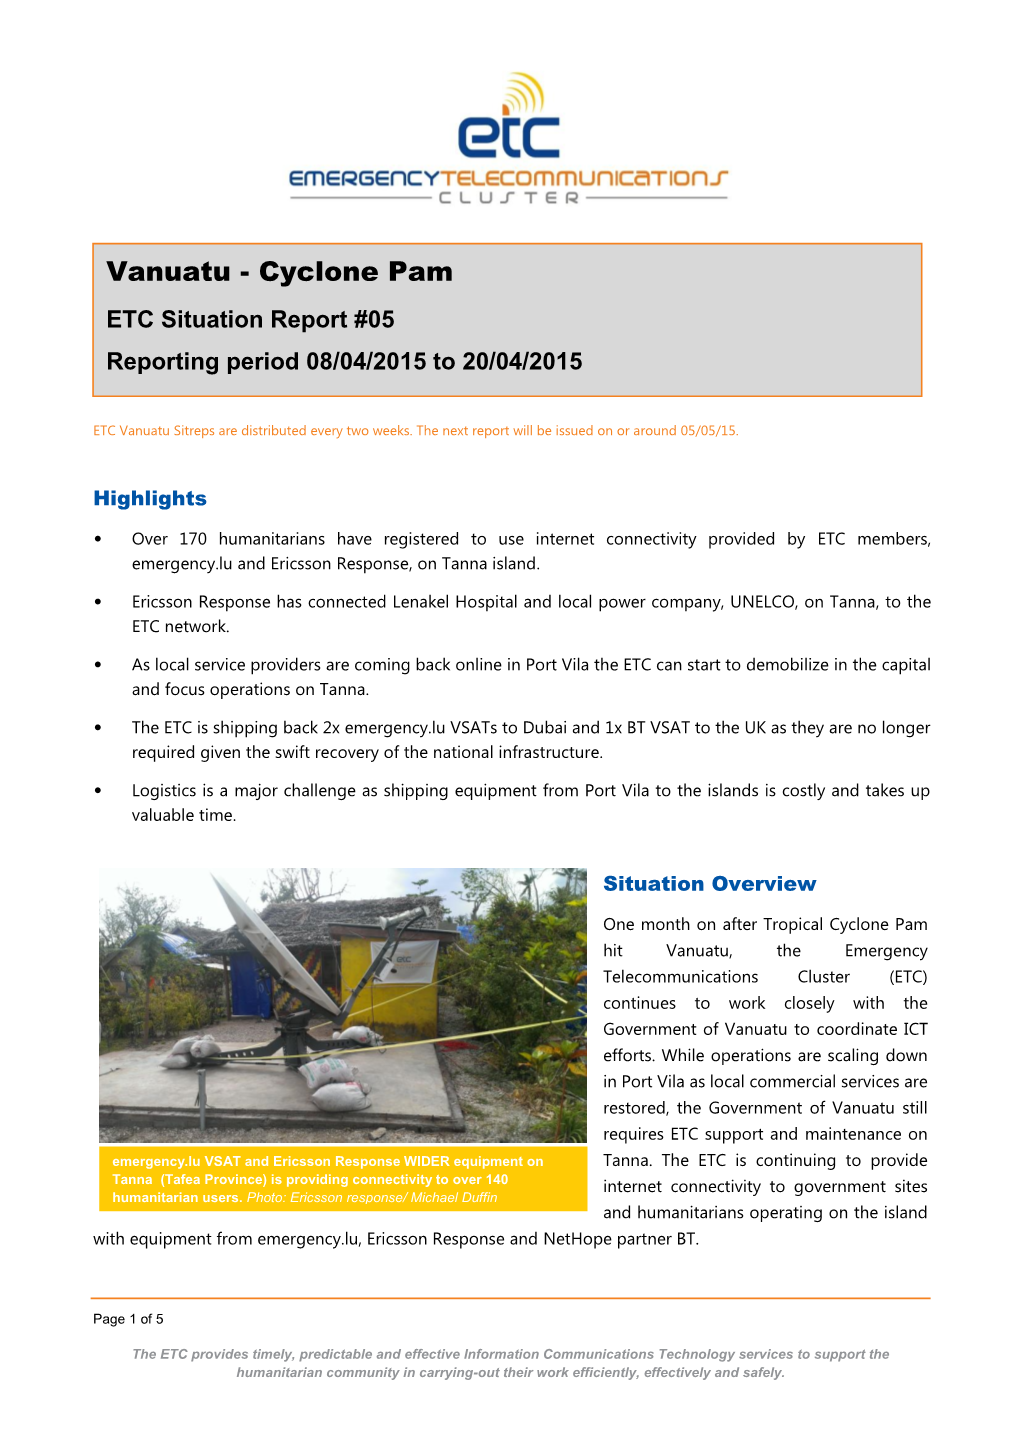 Cyclone Pam ETC Situation Report #05 Reporting Period 08/04/2015 to 20/04/2015